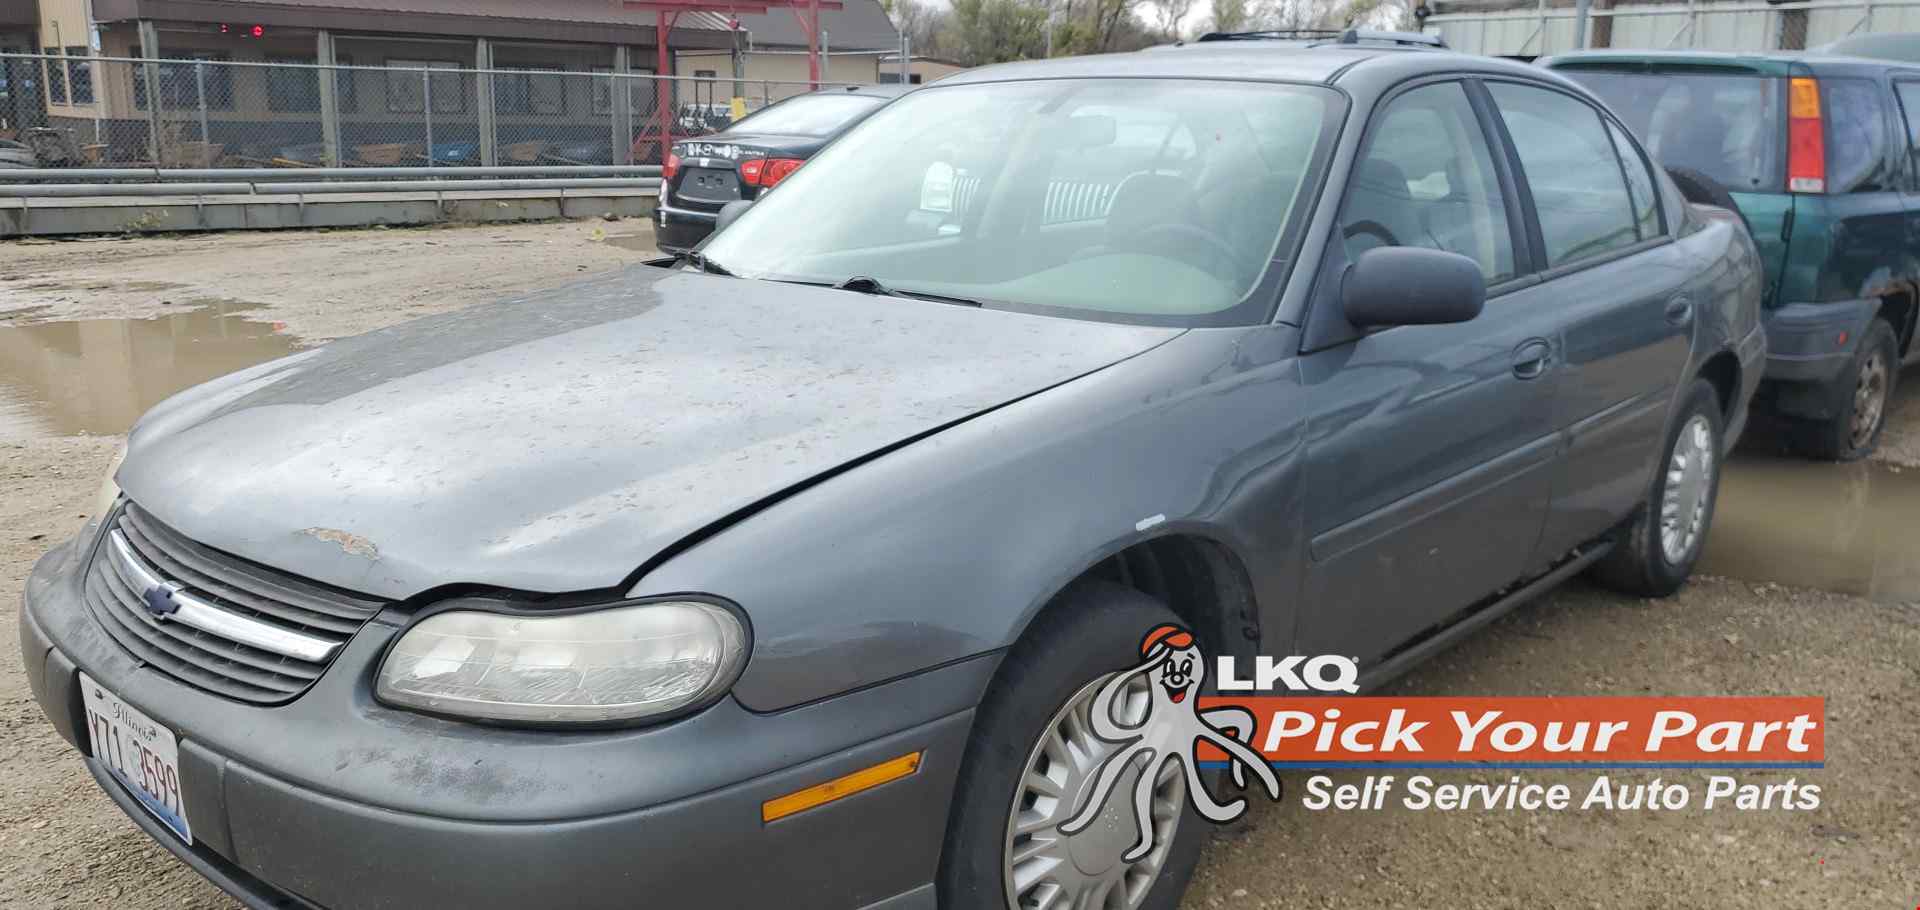 2005 Chevrolet Classic Used Auto Parts | Rockford